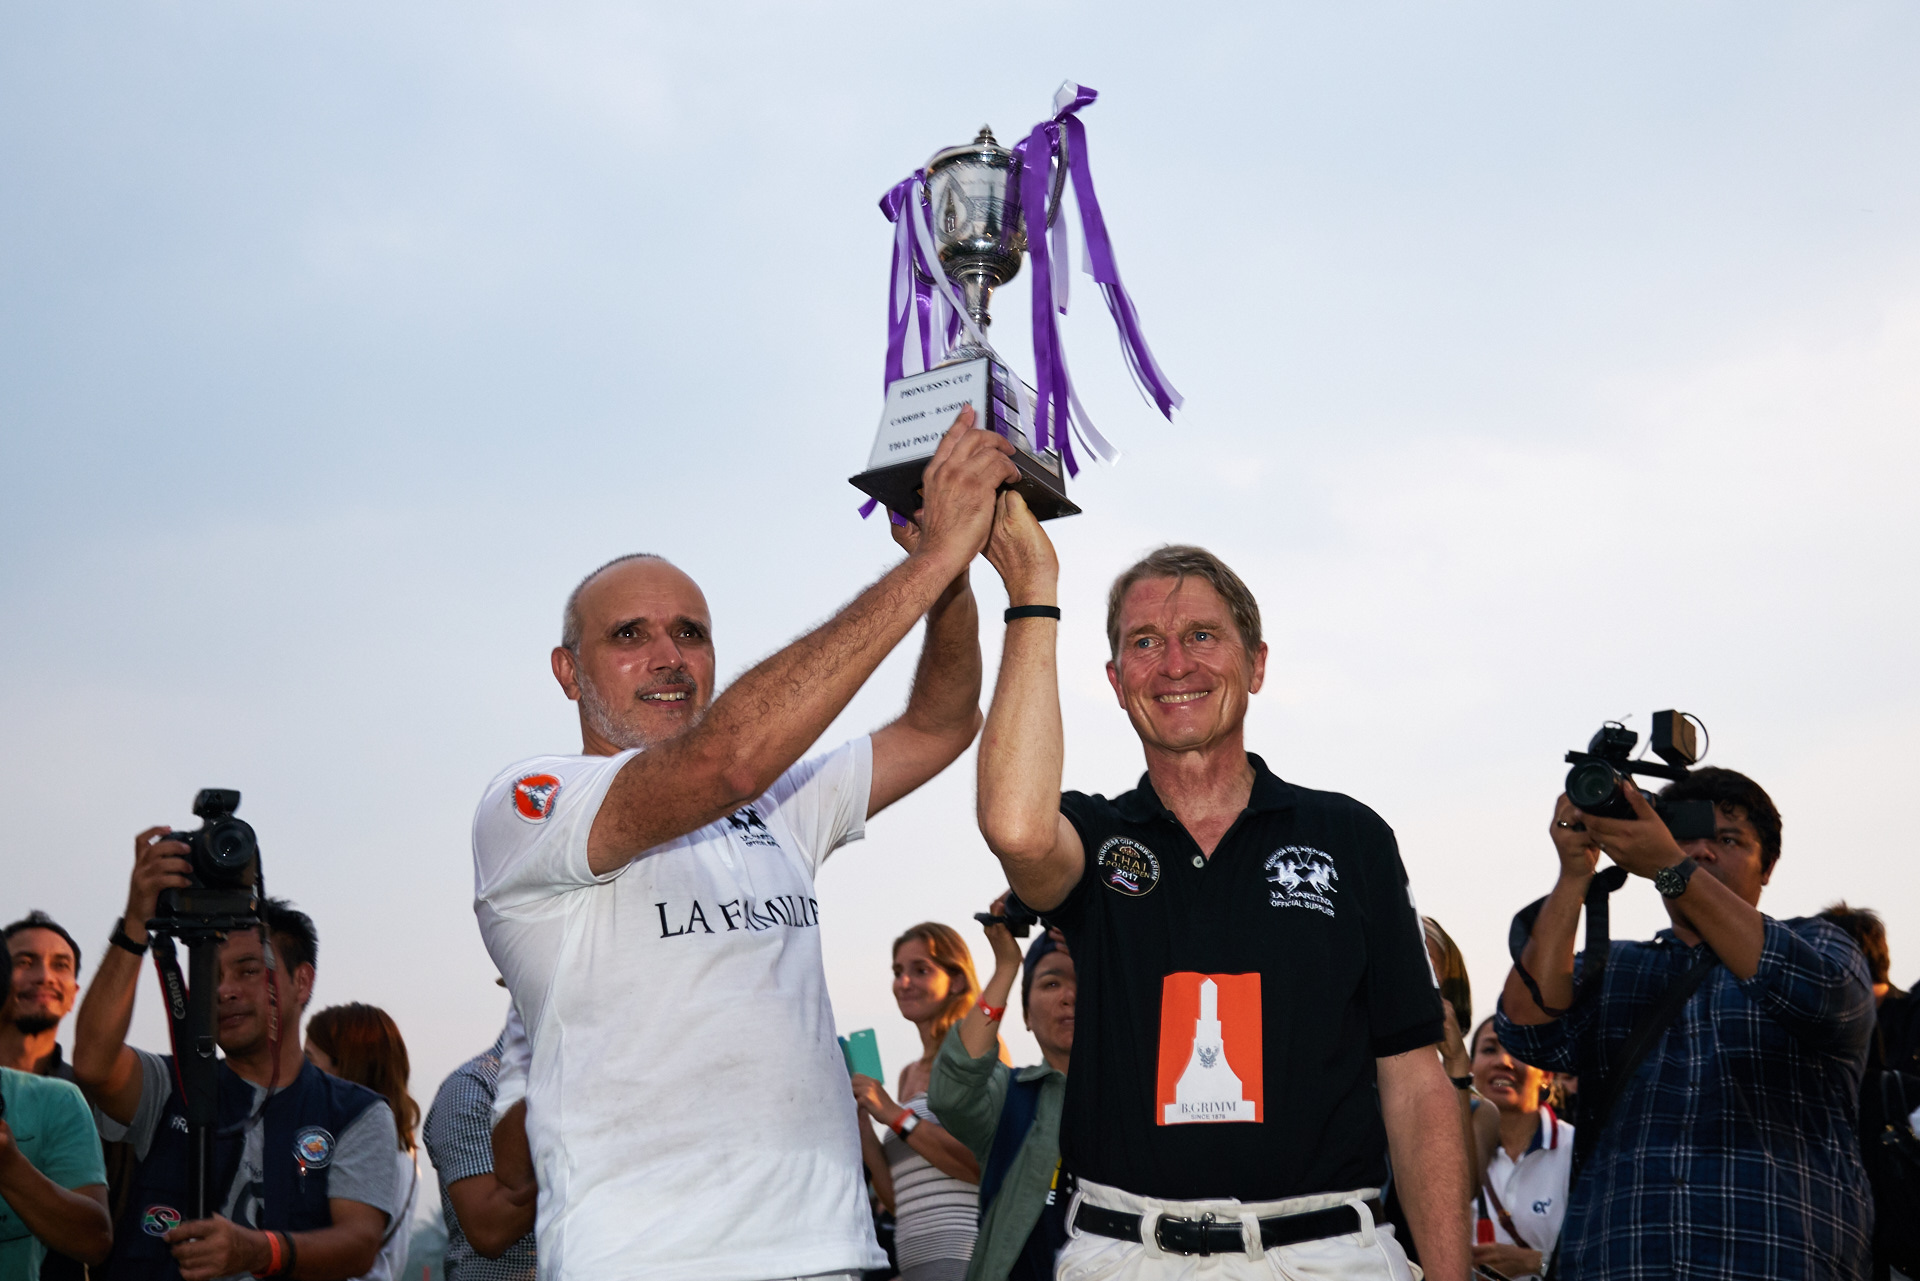 Team captains Mohamed Moiz of La Familia (left) and Harald Link of Thai Polo (right) jointly hoist the HRH Princess Sirindhorn Cup after the final of the 2017 Thai Polo Open was curtailed due to heavy rain.